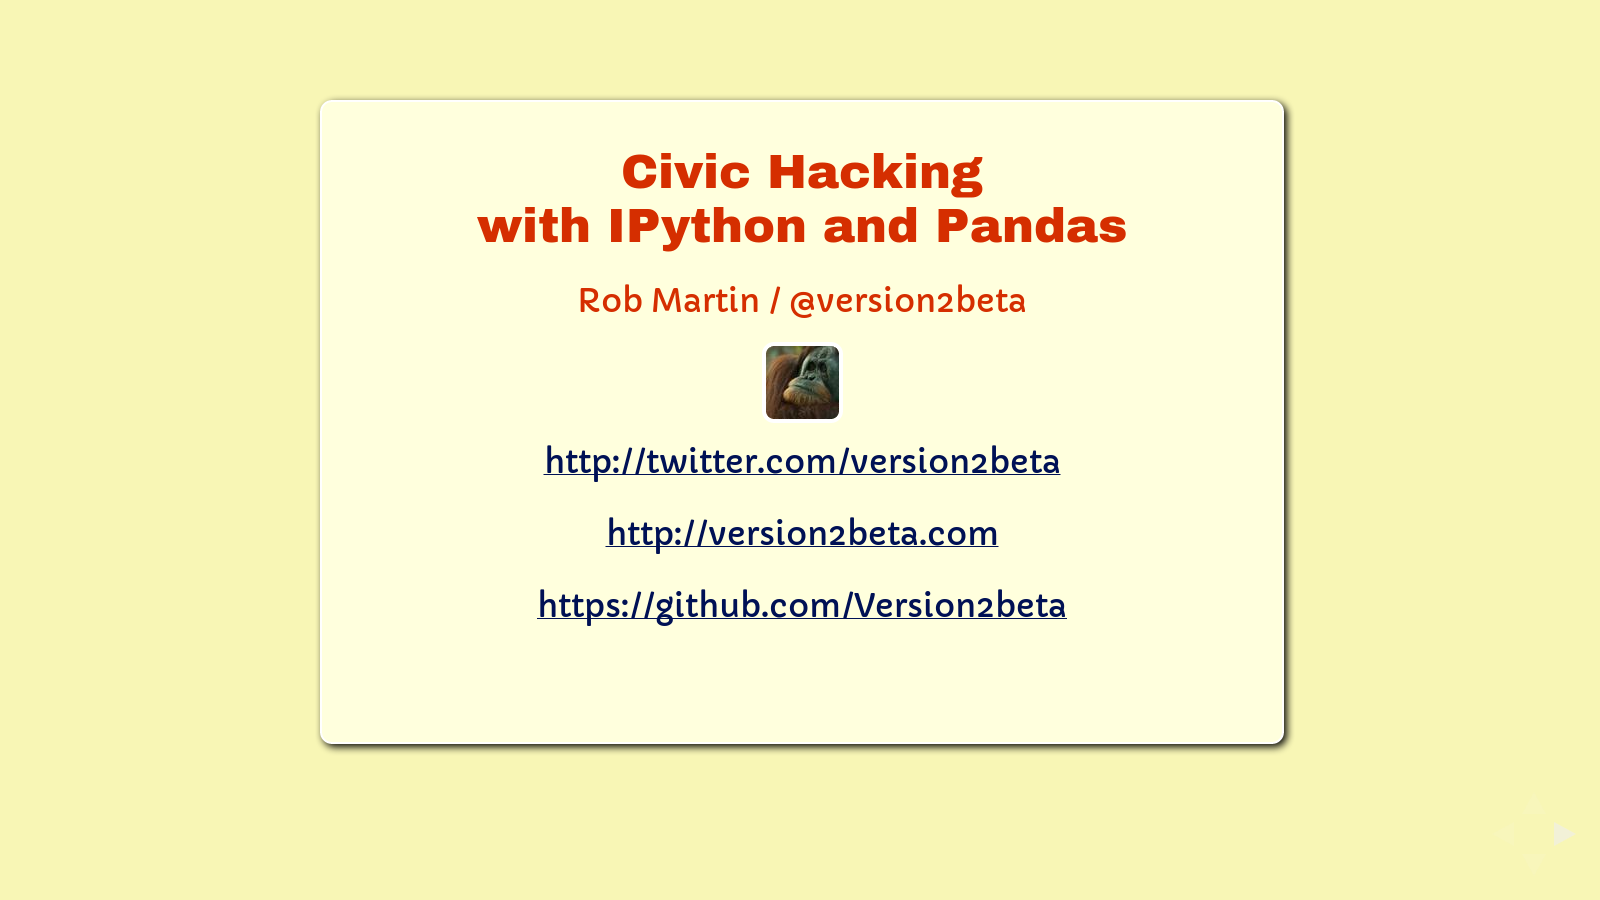 Slide: @version2beta and contact information